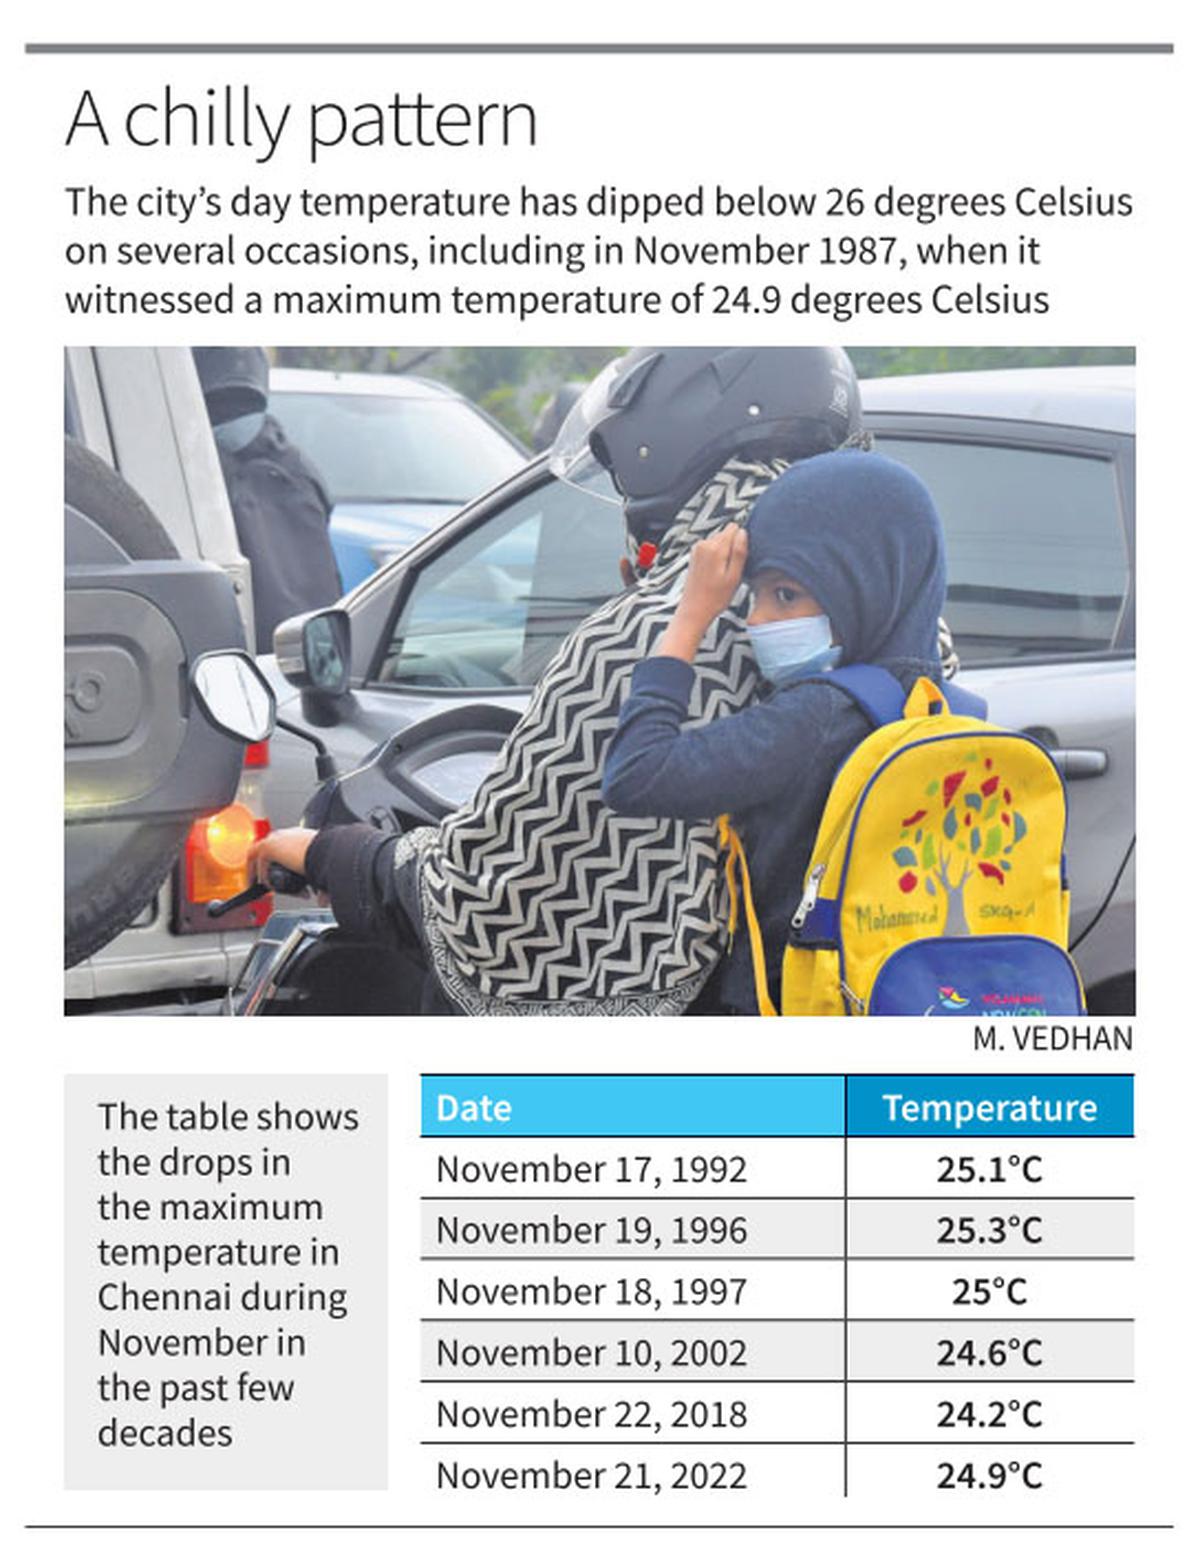 Chennai has experienced nippy November weather in previous decades too